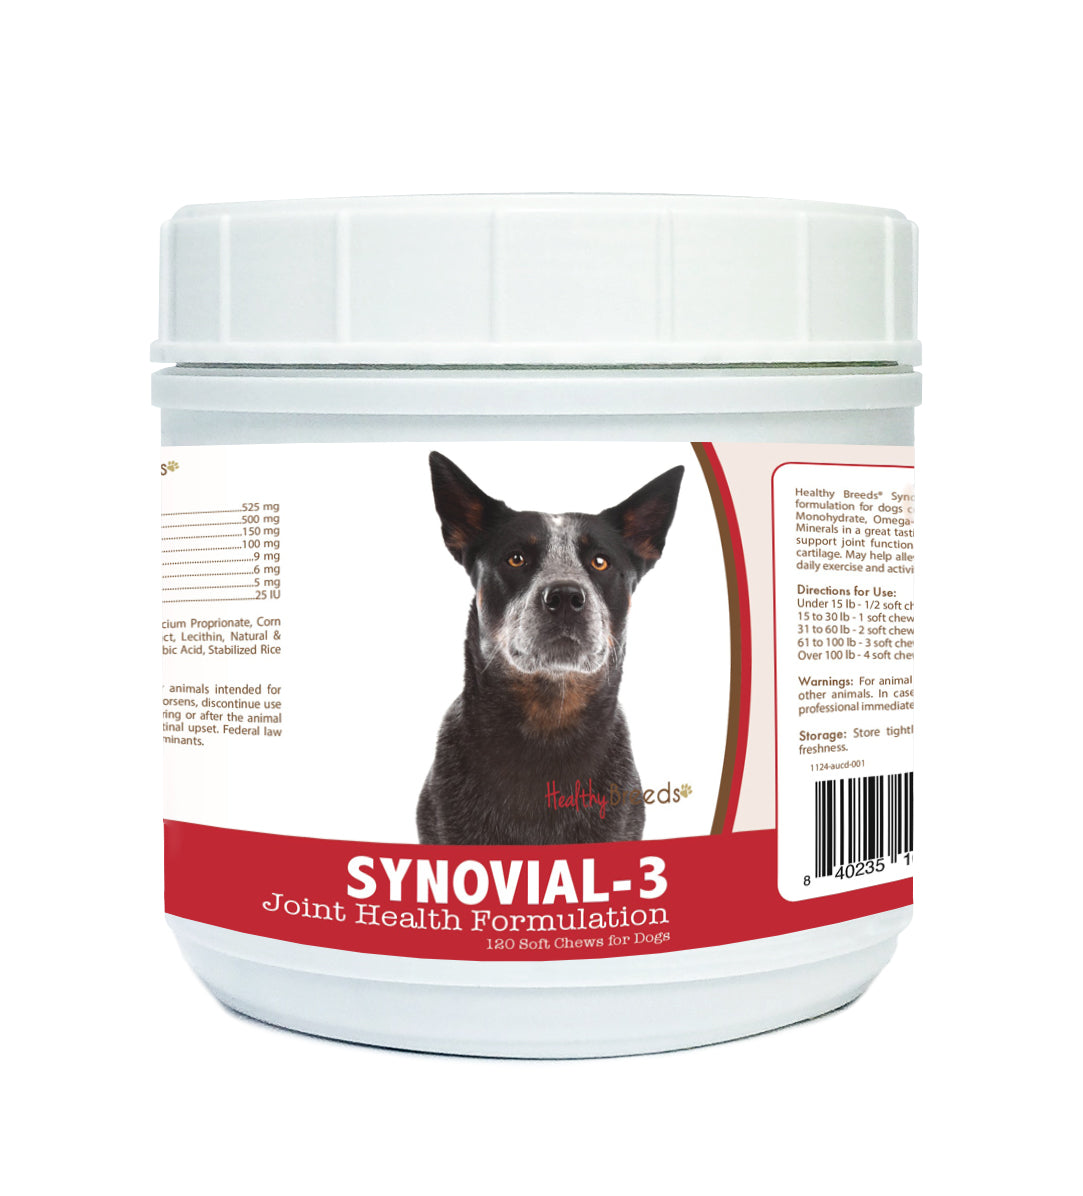 Australian Cattle Dog Synovial-3 Joint Health Formulation Soft Chews 120 Count